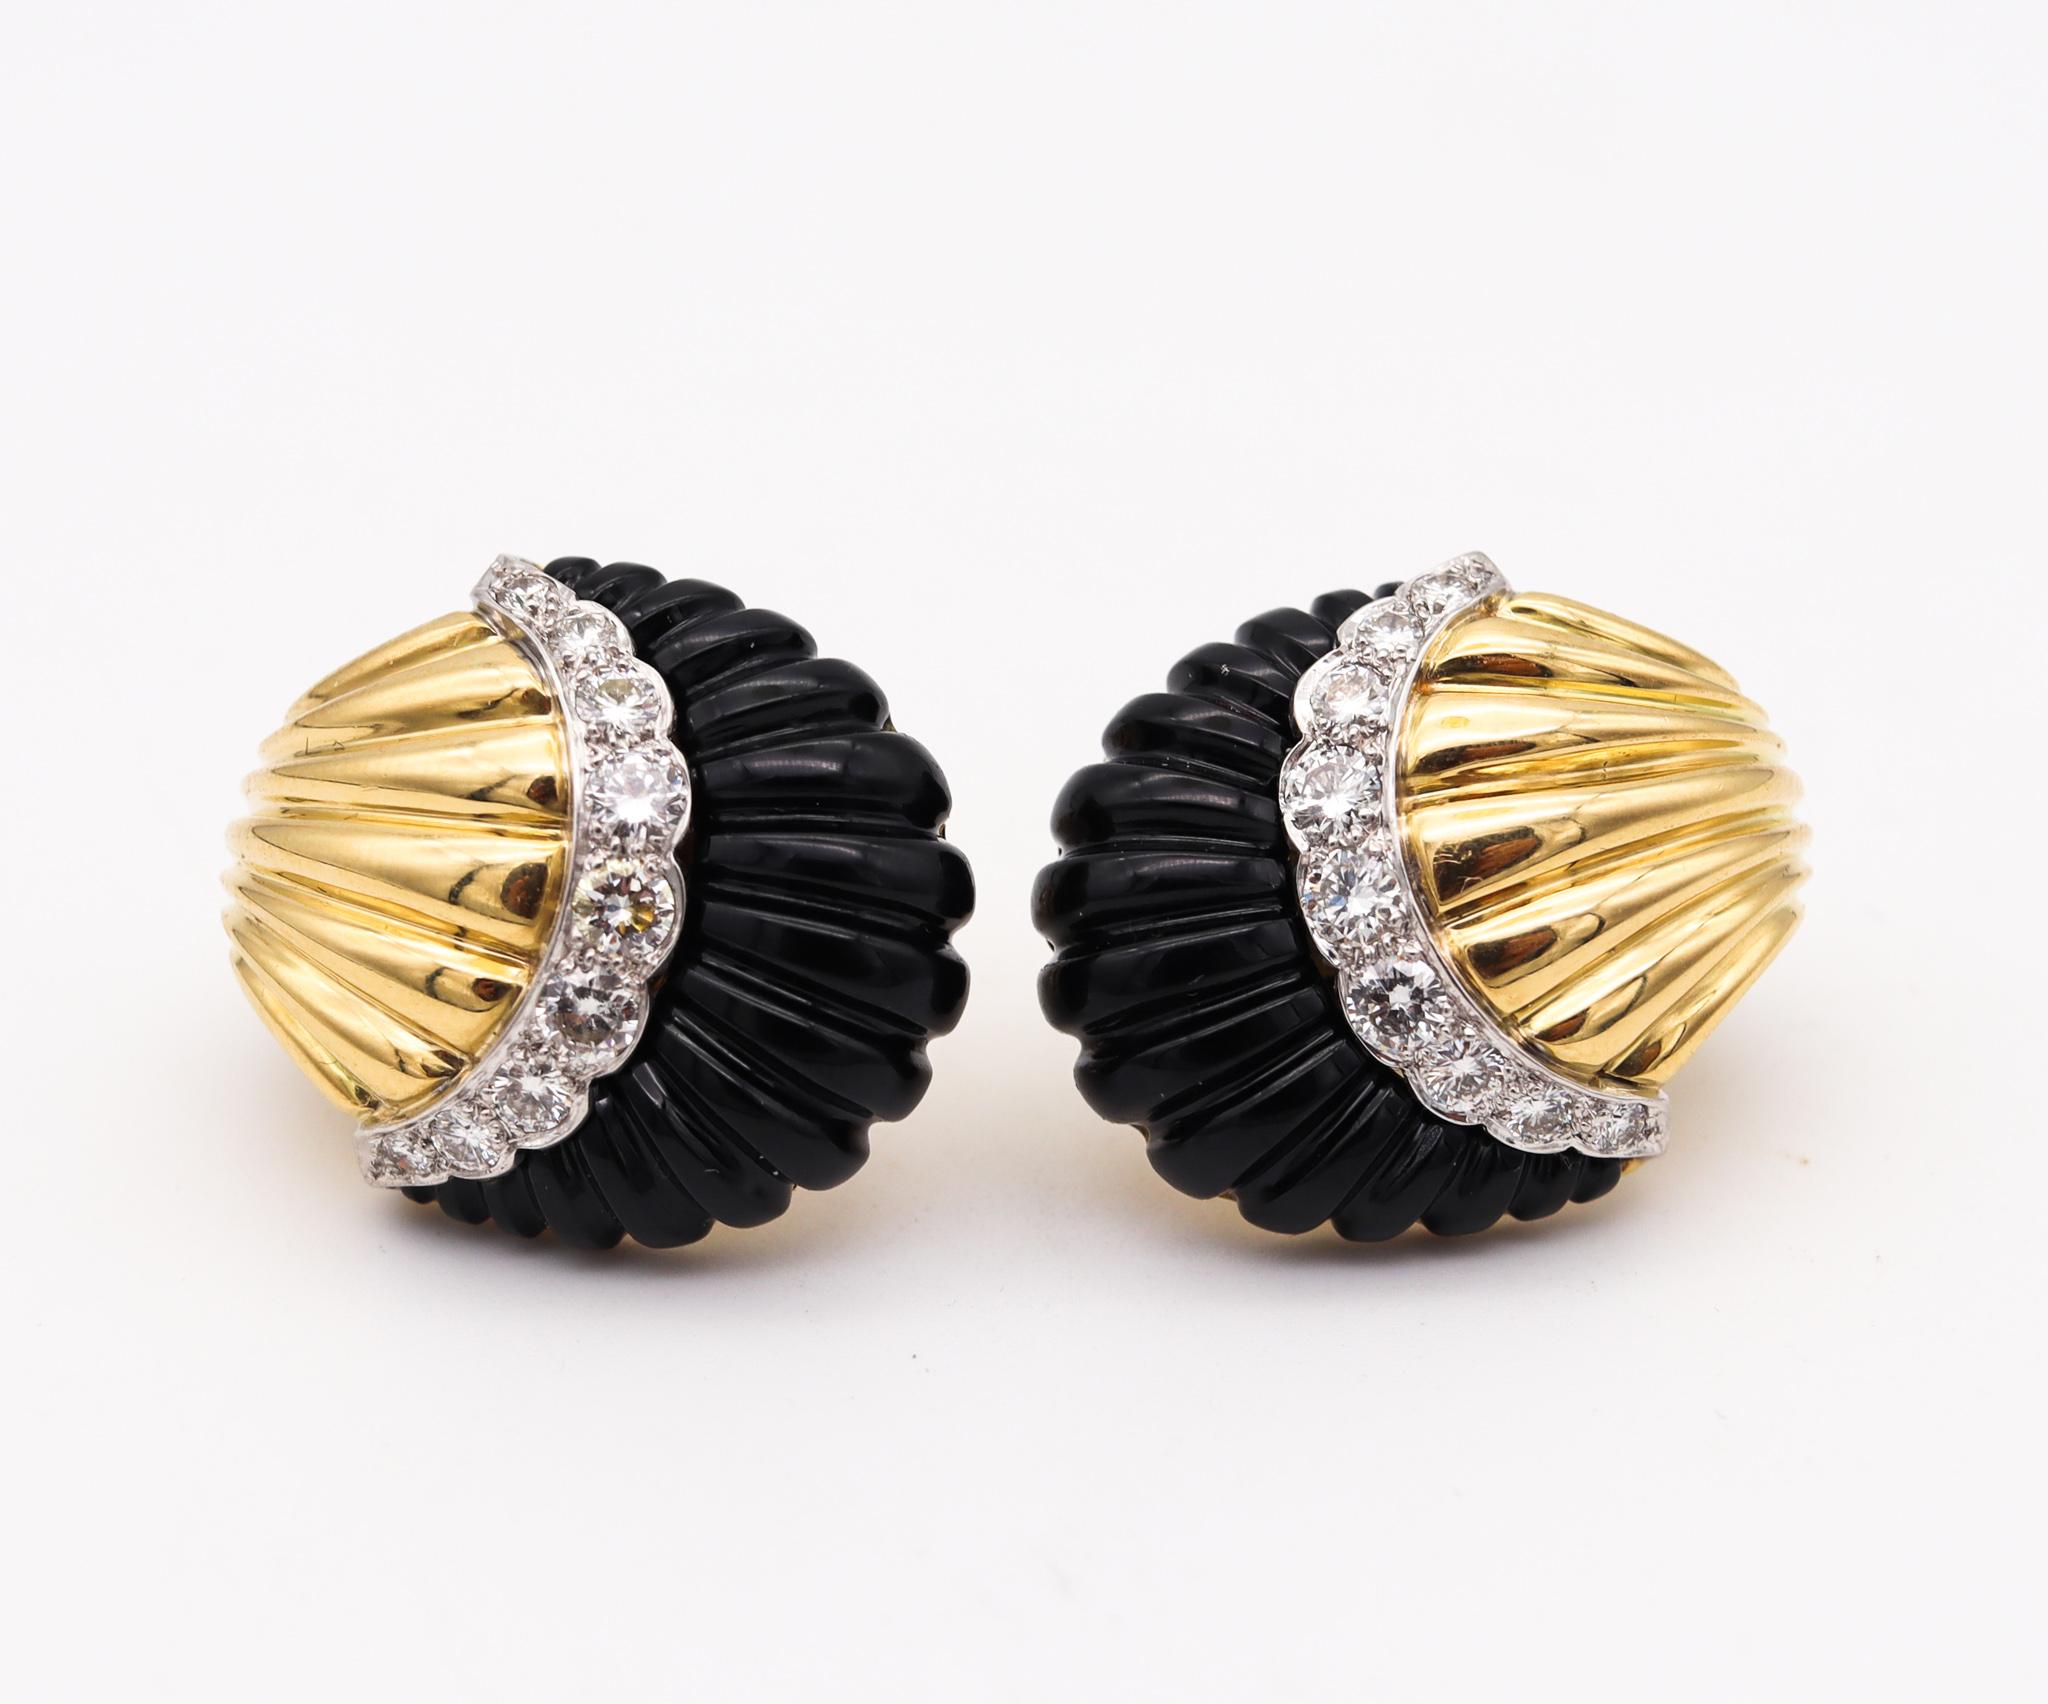 Classic modernist fluted earrings.

An elegant pair crafted with art deco and fluted scalloped patterns in solid yellow gold of 18 karats with high polished finish. They are suited at the reverse with posts (Removable) for pierced ears and French